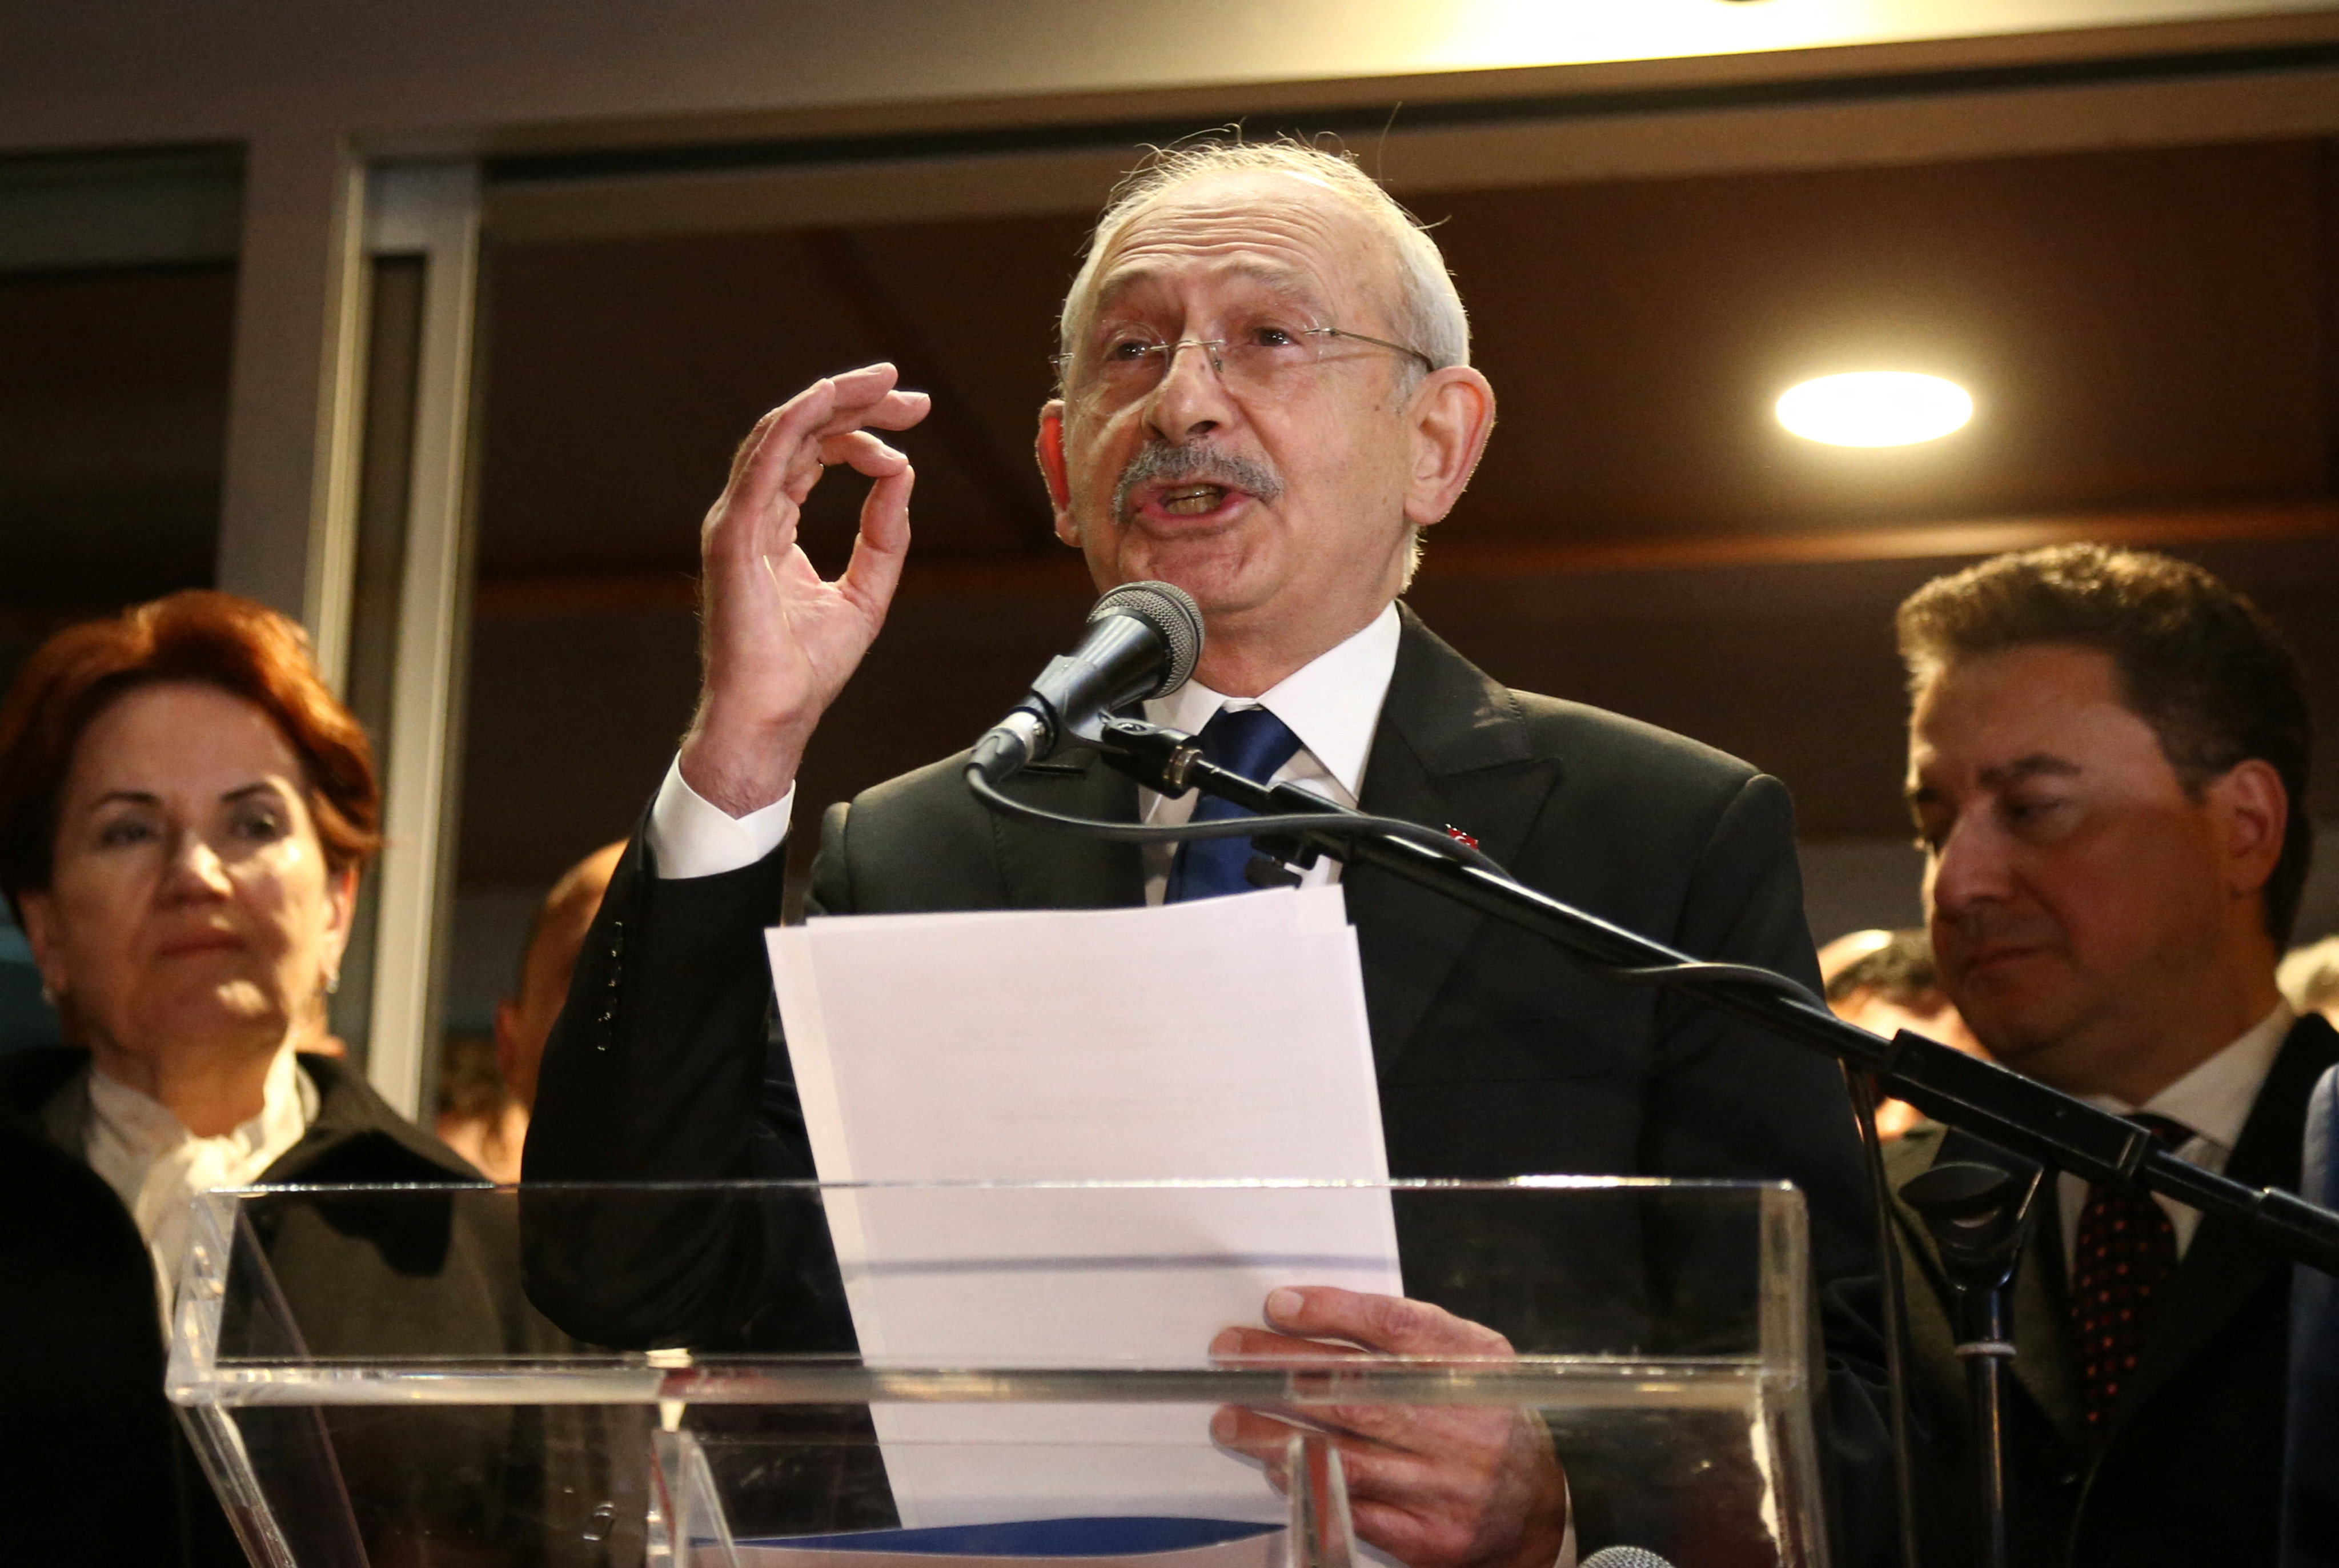 Turkey’s main opposition Republican People’s Party (CHP) leader Kemal Kilicdaroglu speaks to the media following a meeting of the opposition alliance in Ankara on Monday. Photo: Reuters